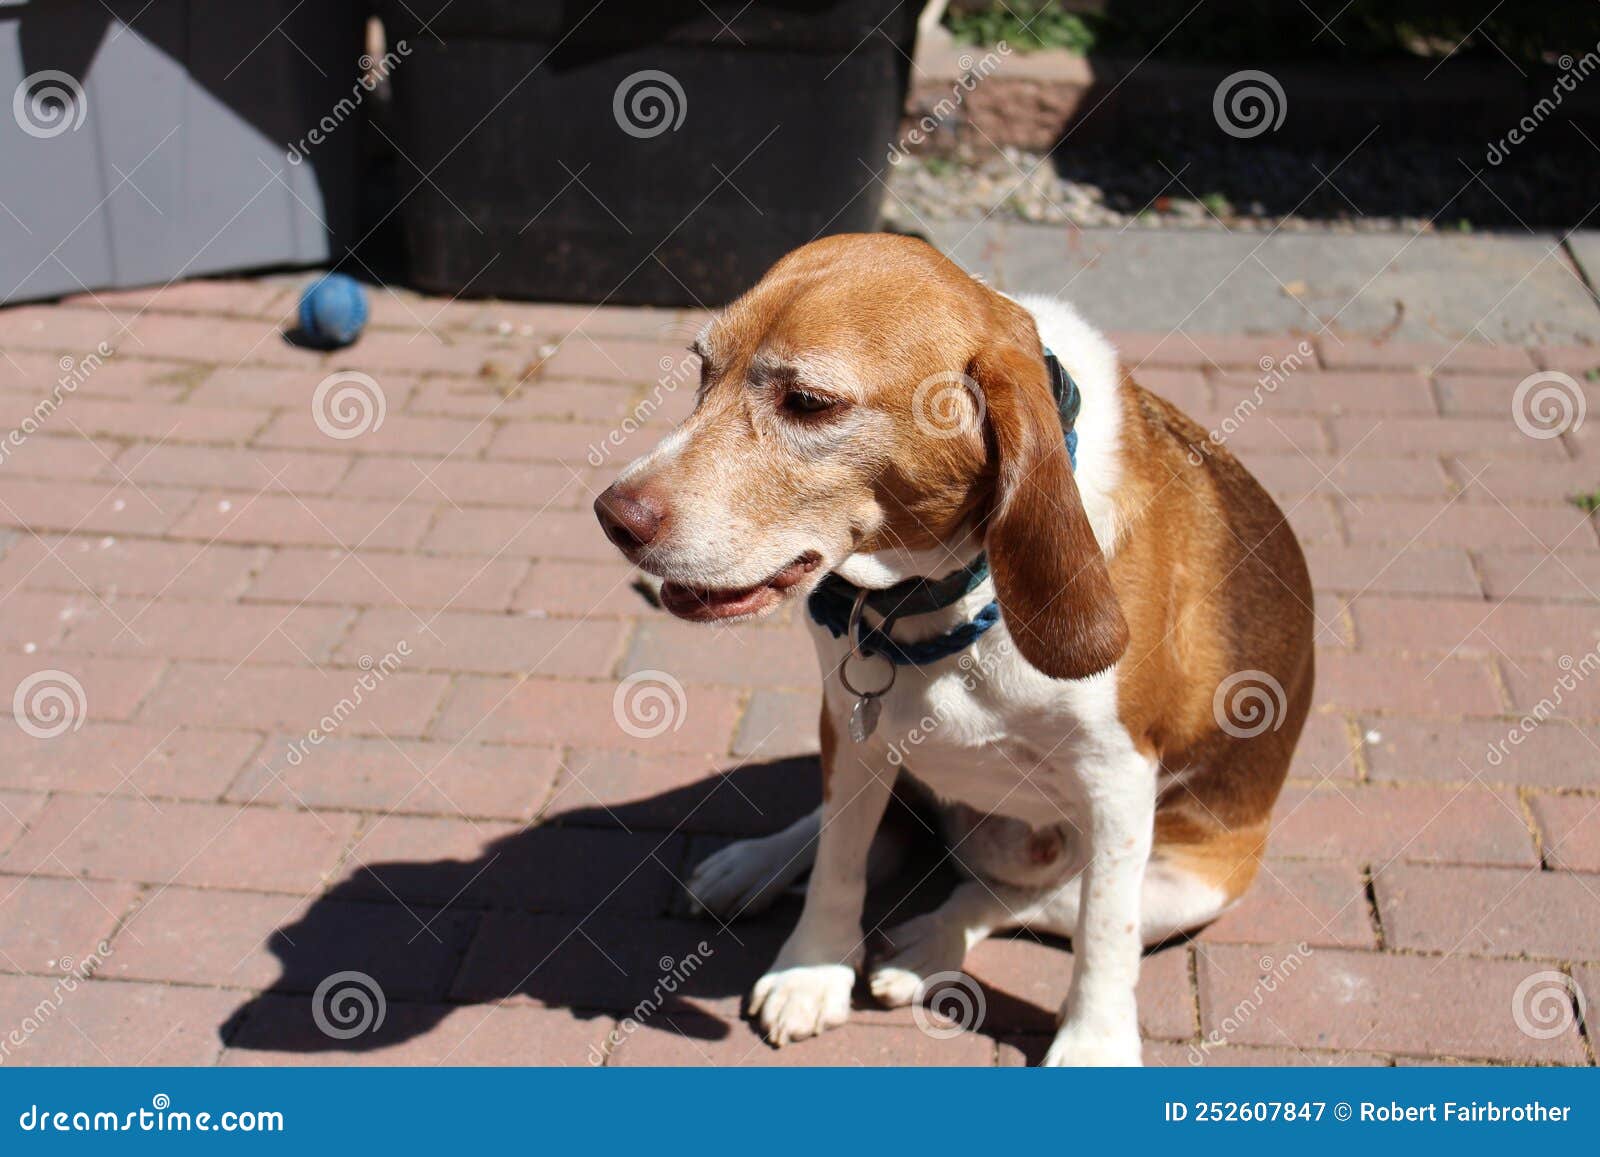 Beansy Puppy Panting Hard Sitting in the Sun Stock Image - Image of ...